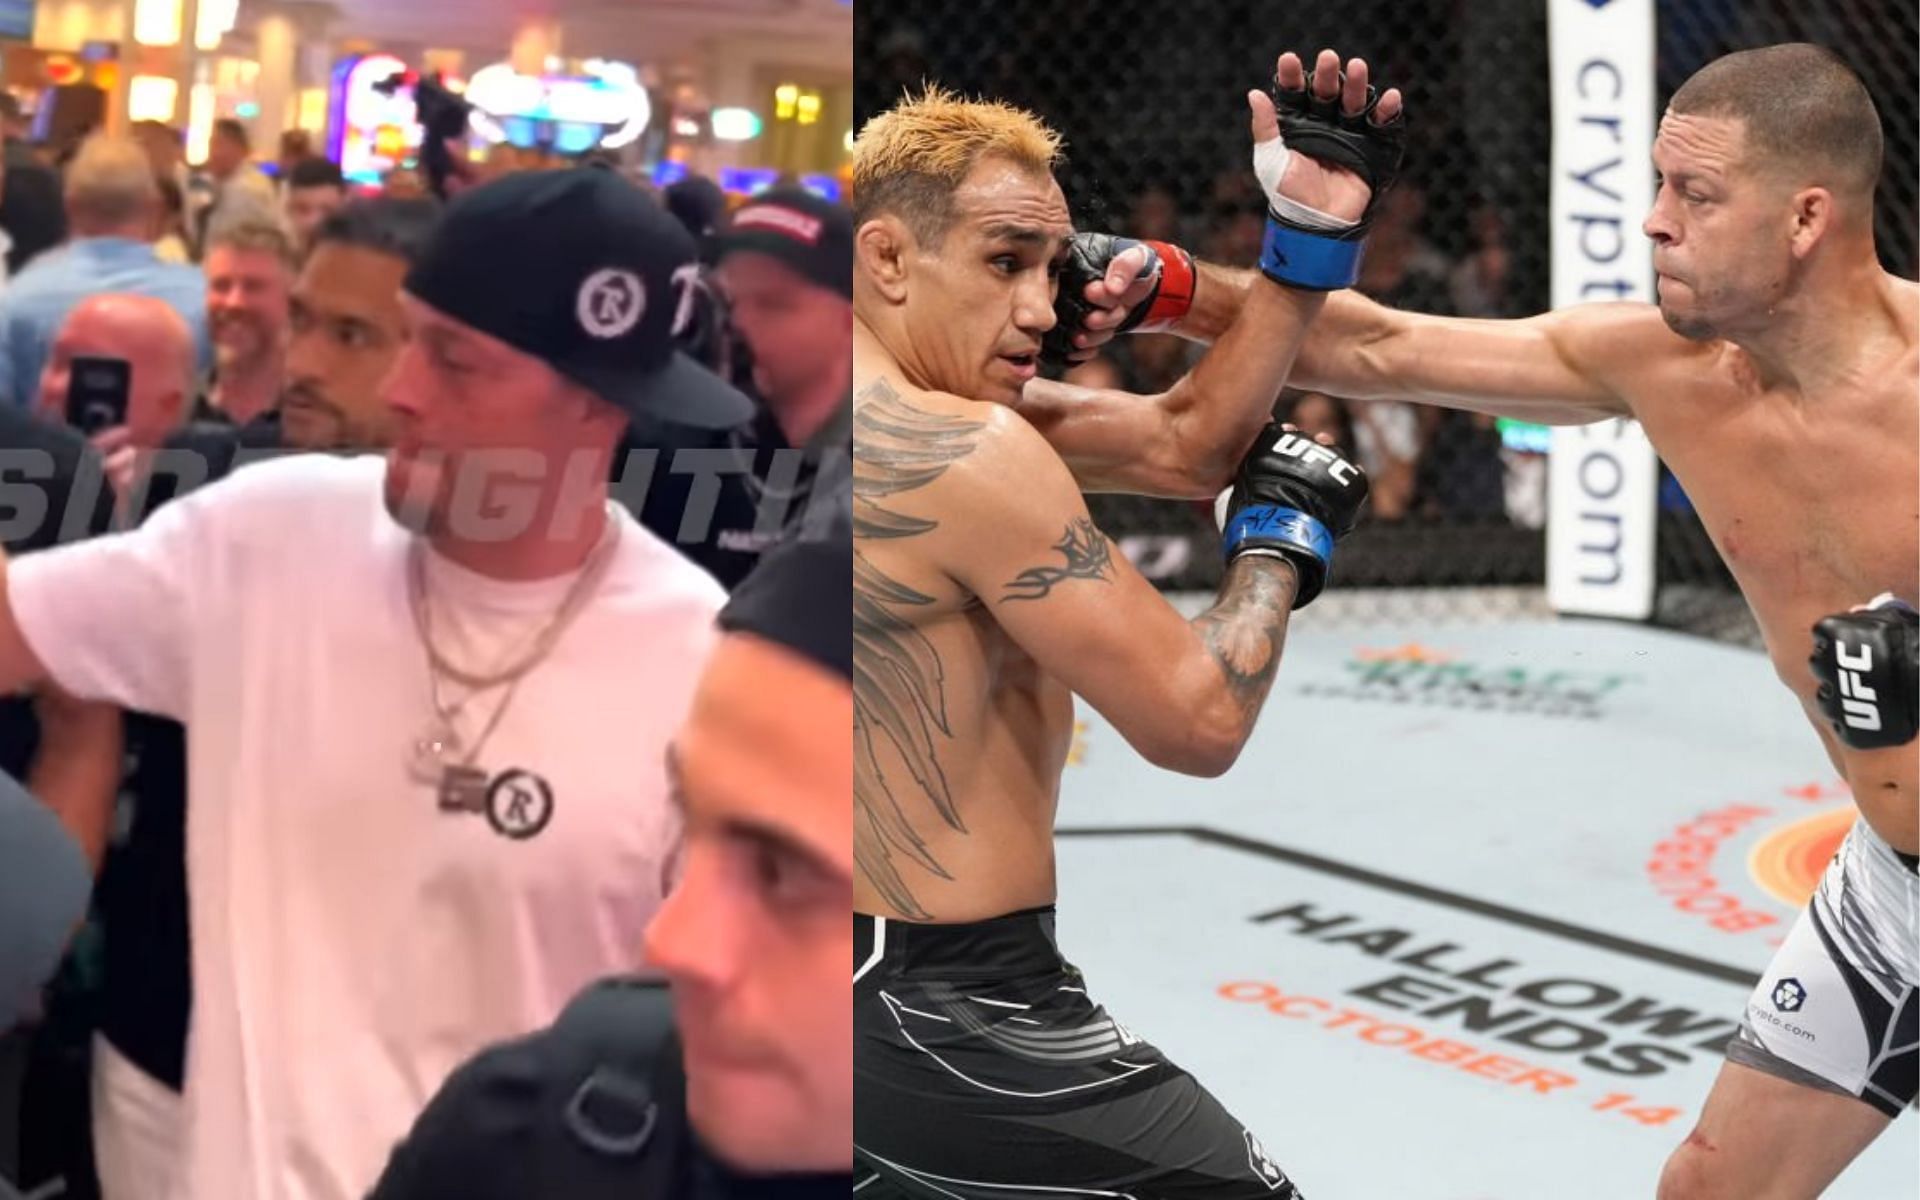 Nate Diaz (left) and his win against Tony Ferguson at UFC 279 (right). [Images courtesy: left image from YouTube InsideFighting and right image from Getty Images]